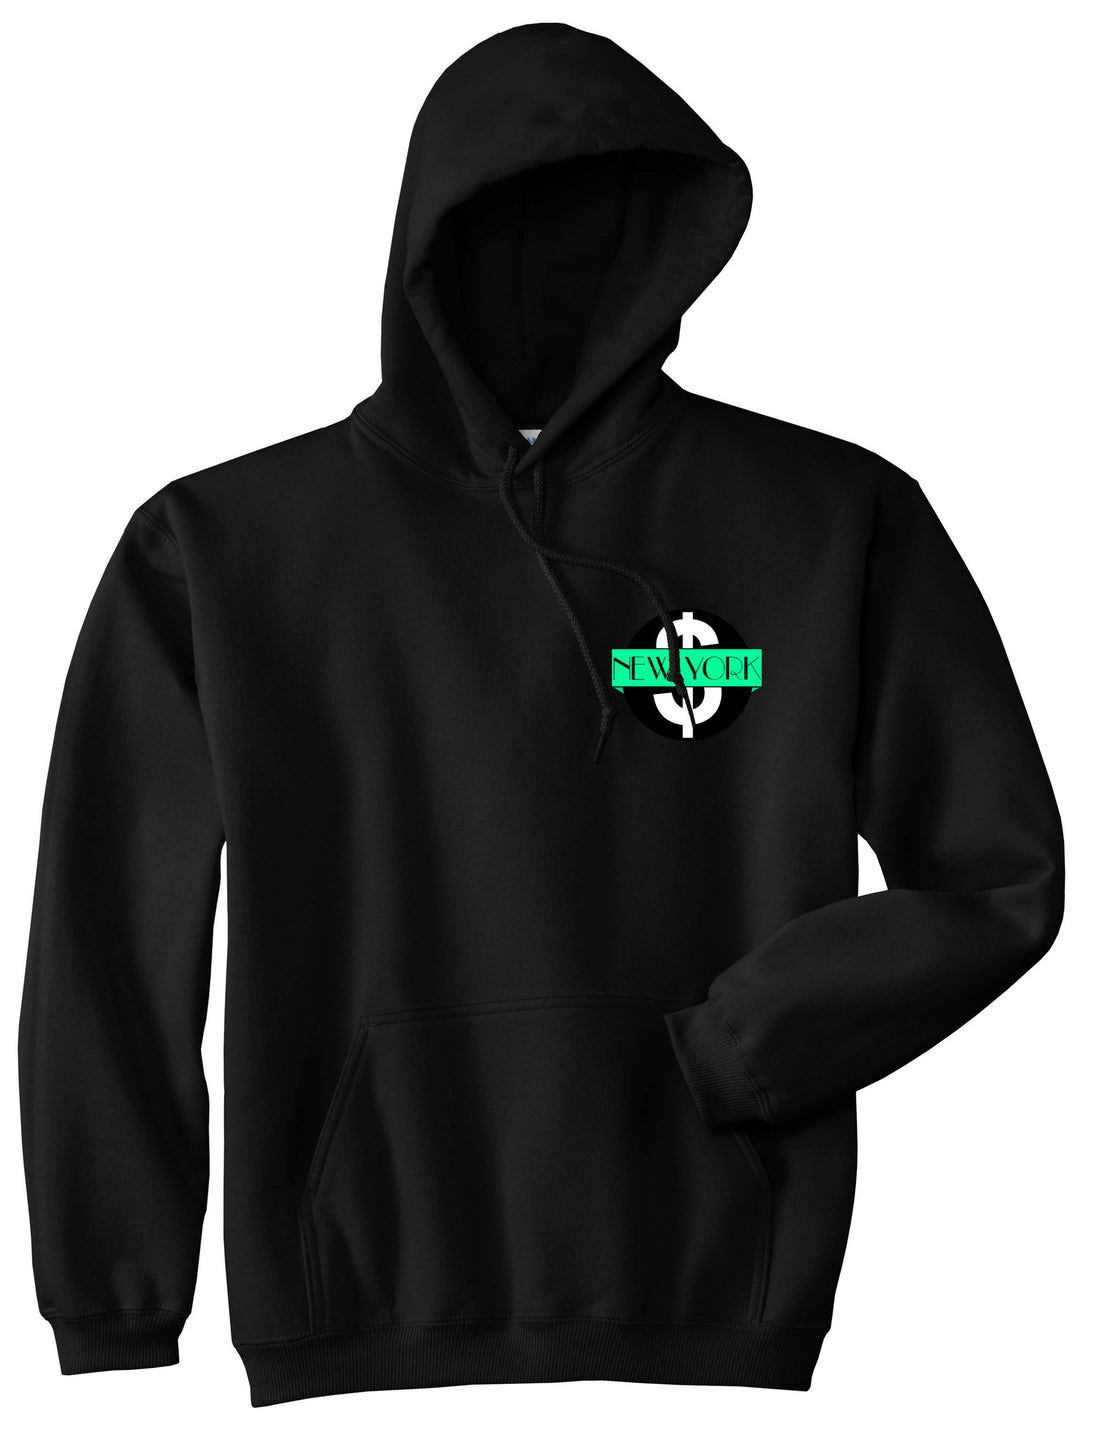 New York Mint Chest Logo Pullover Hoodie in Black By Kings Of NY